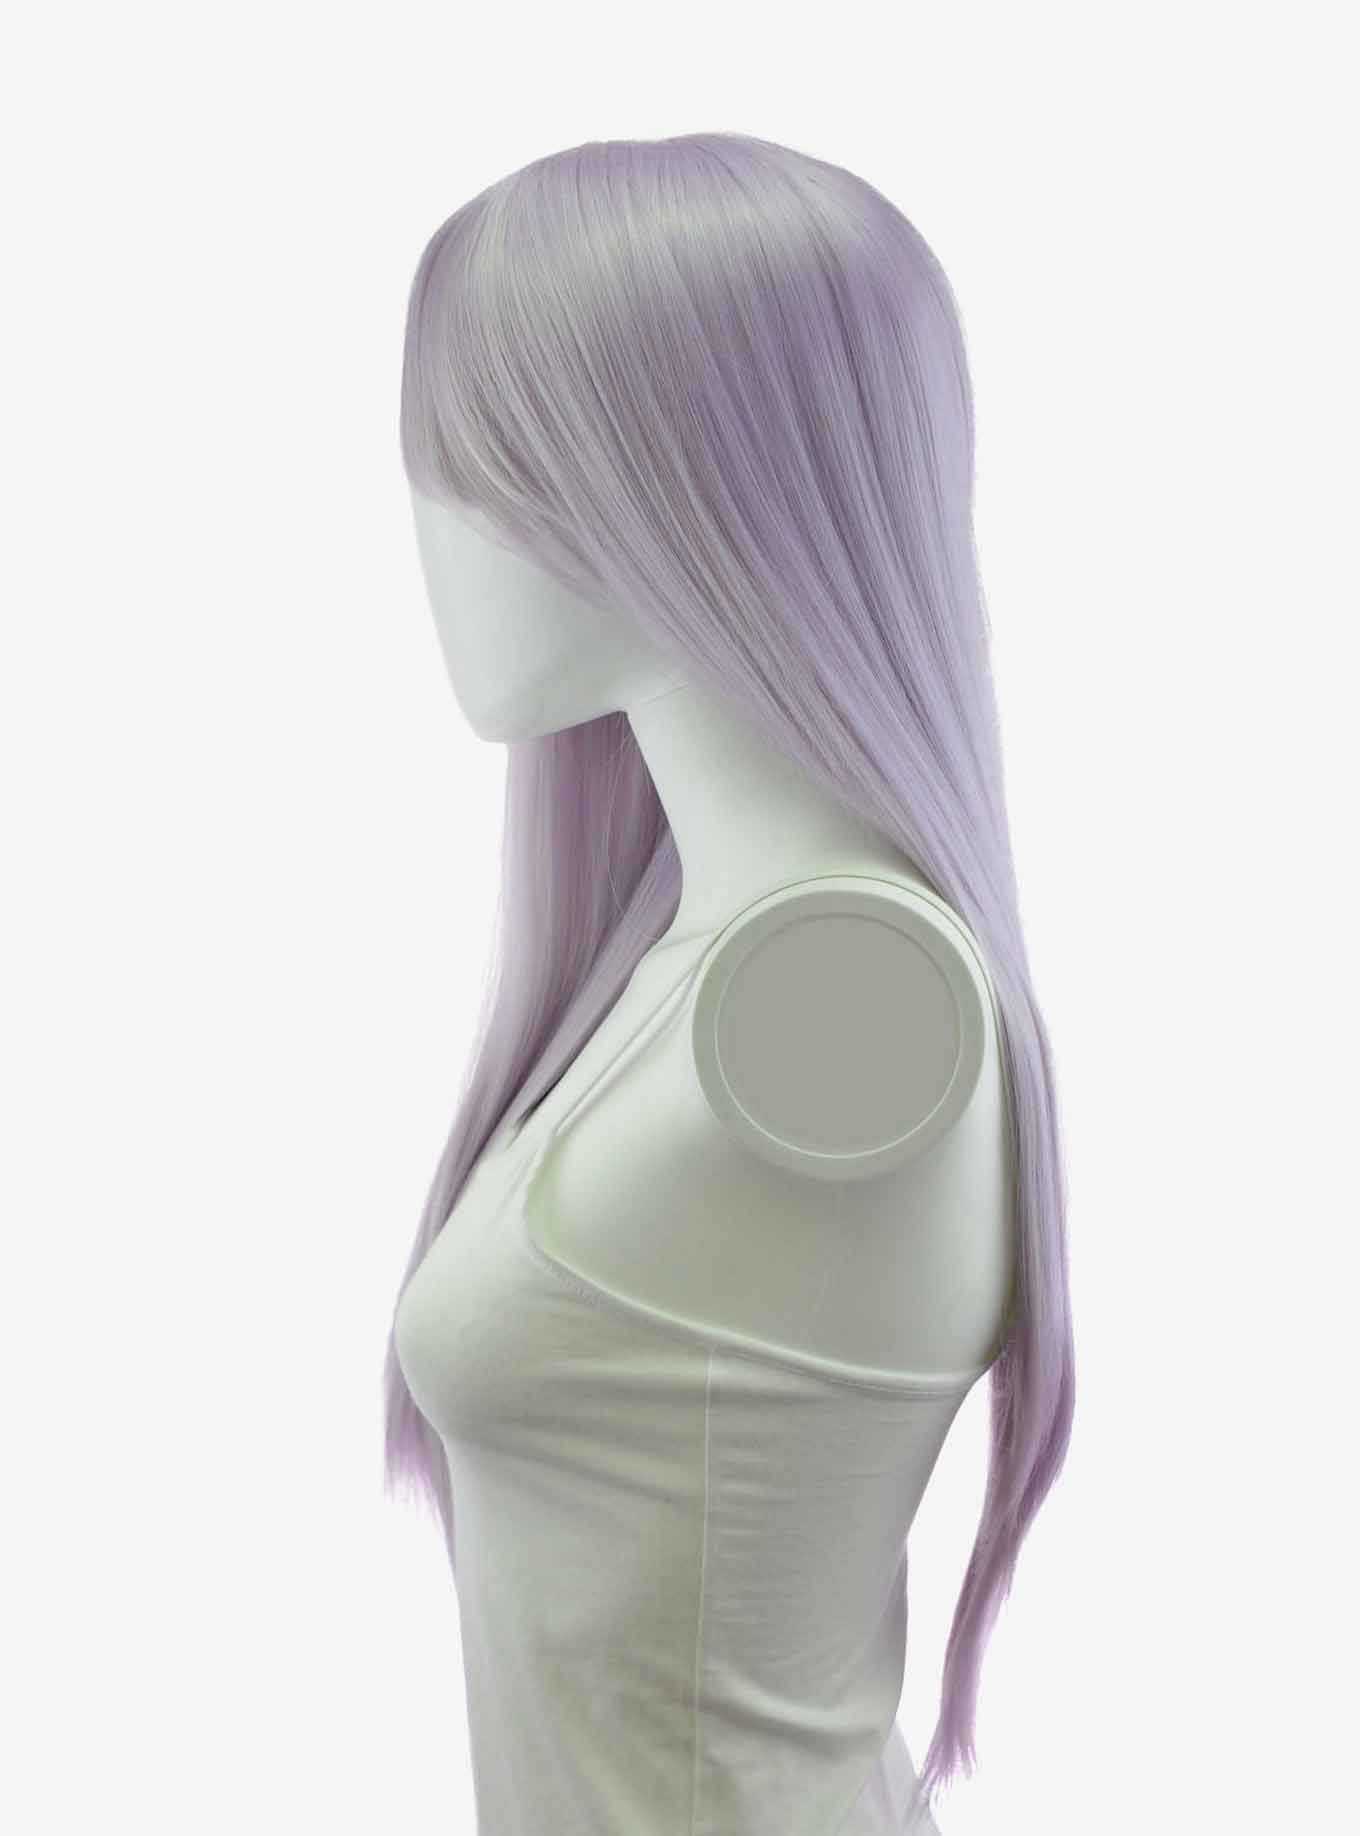 Epic Cosplay Nyx Ice Purple Long Straight Wig, , hi-res